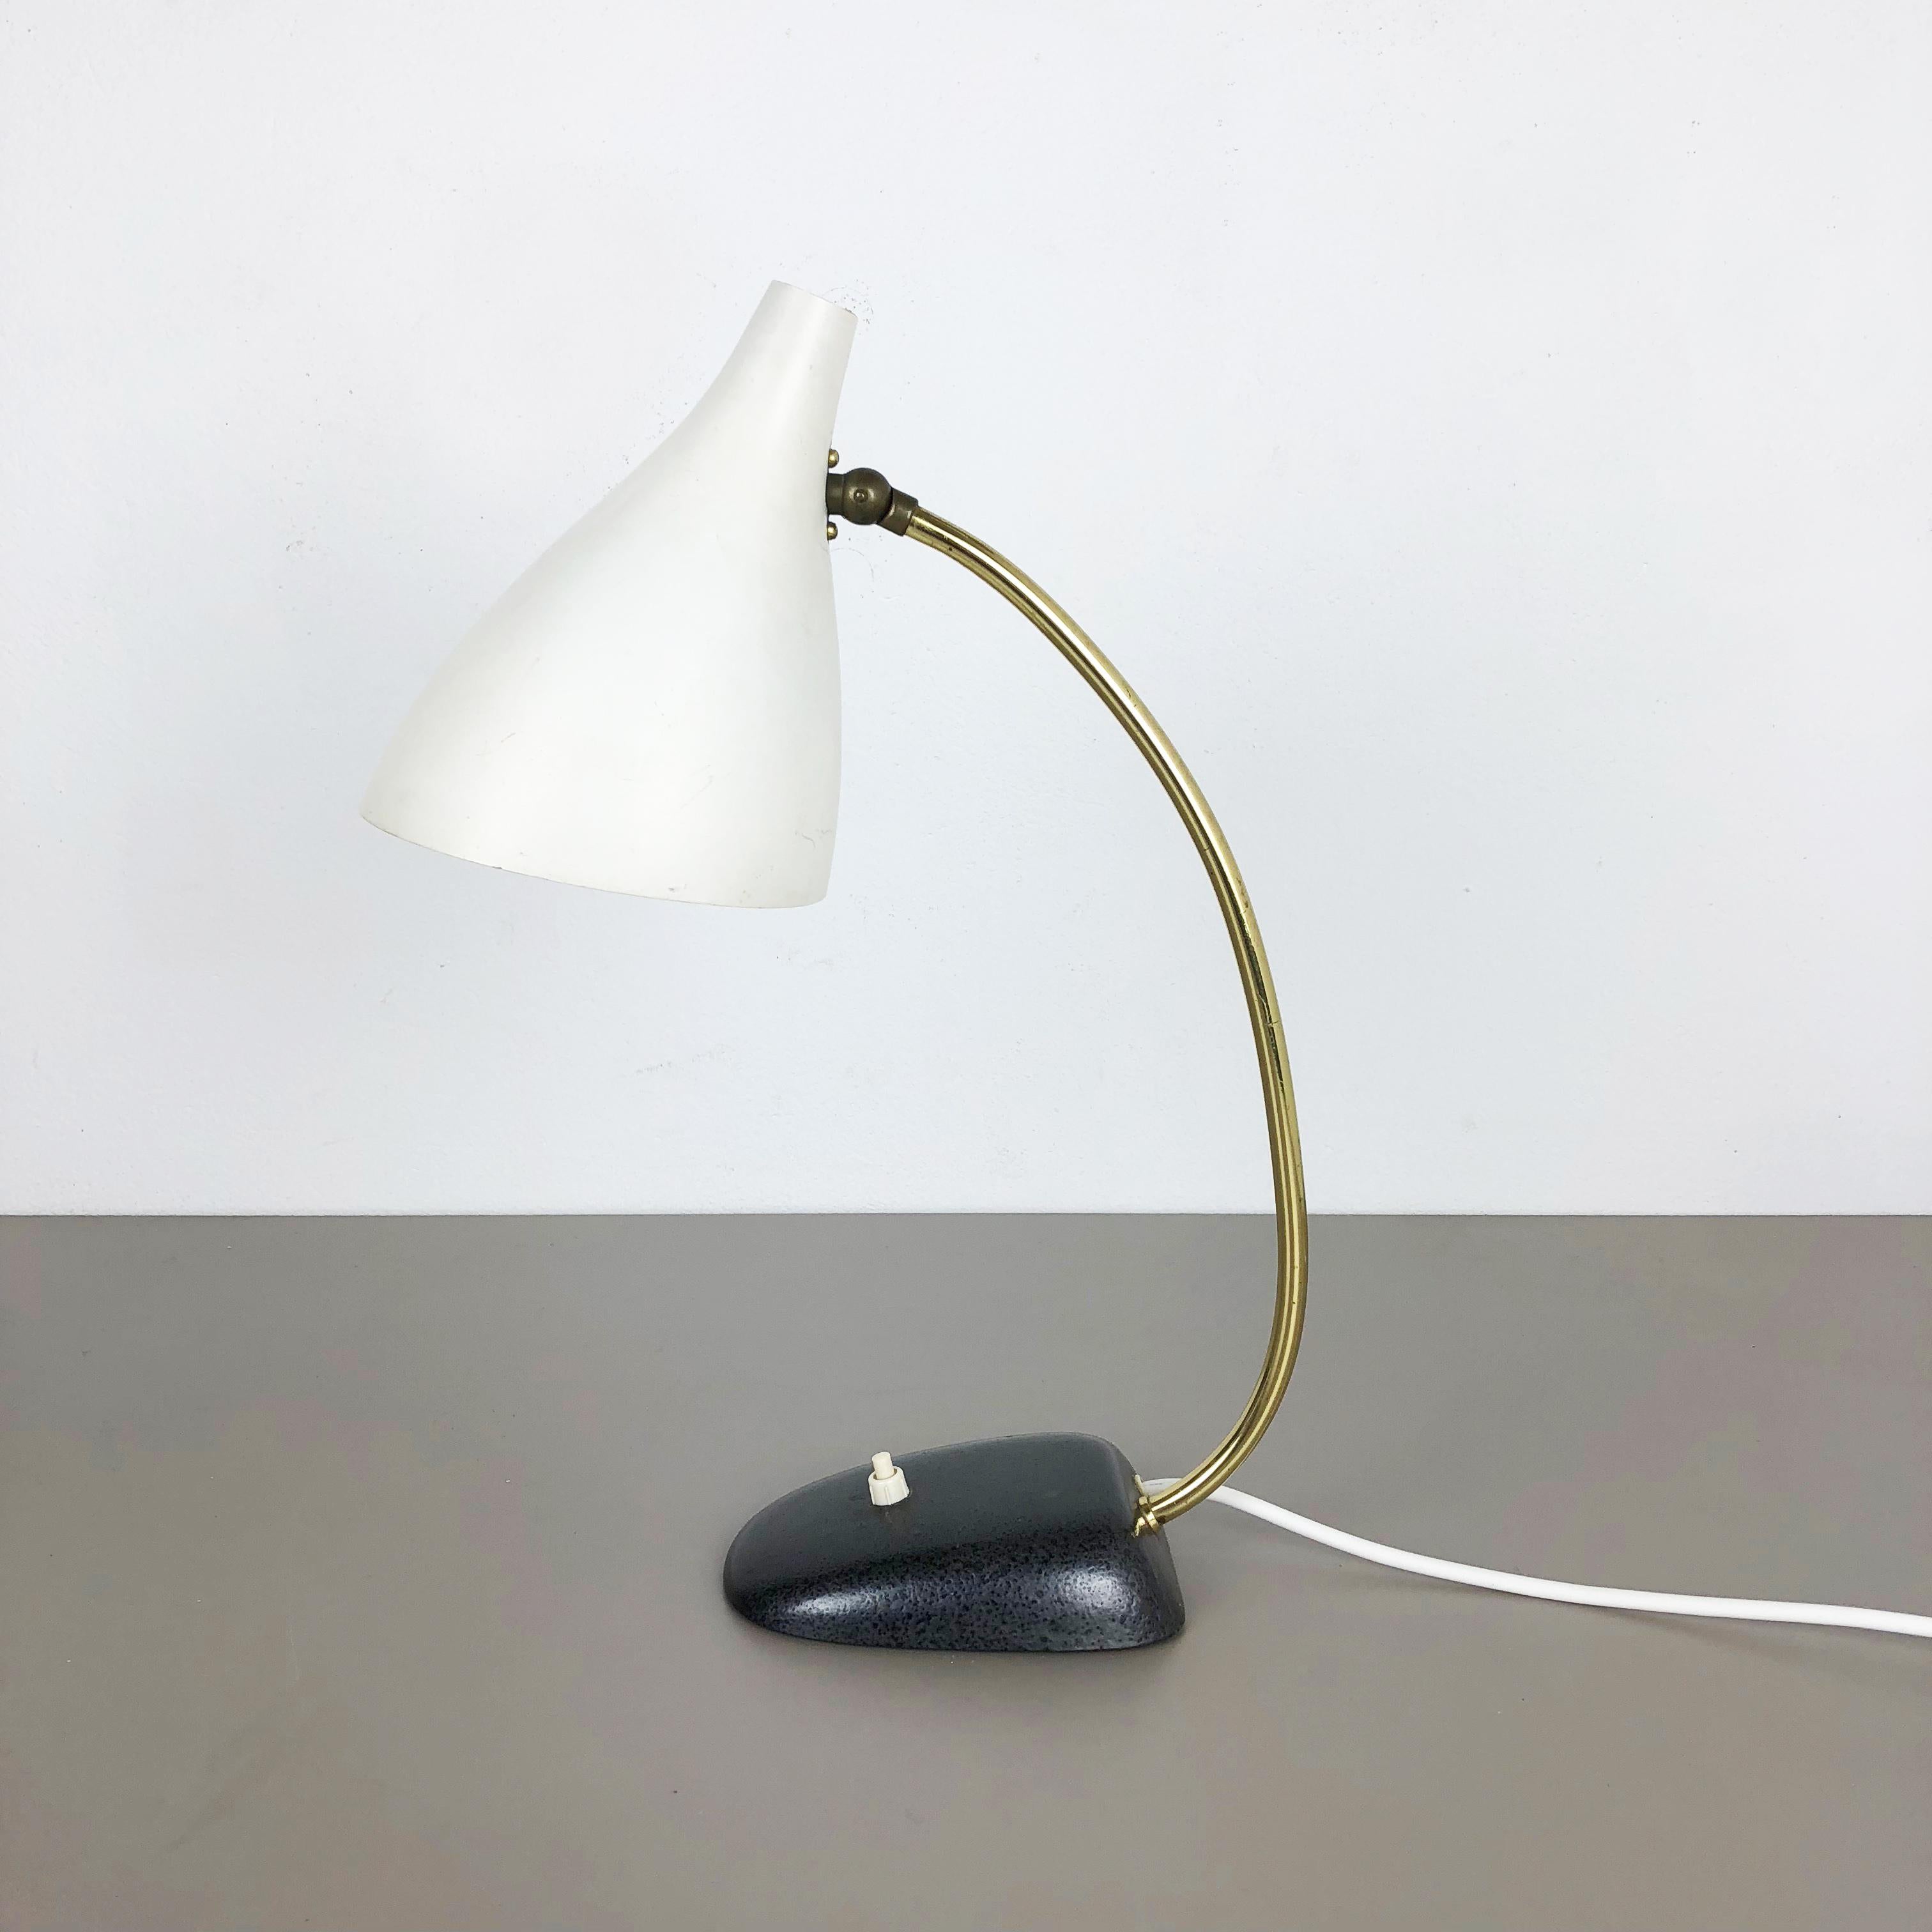 Original Modernist 1960s Metal Table Light Made by Cosack, Germany For Sale 9